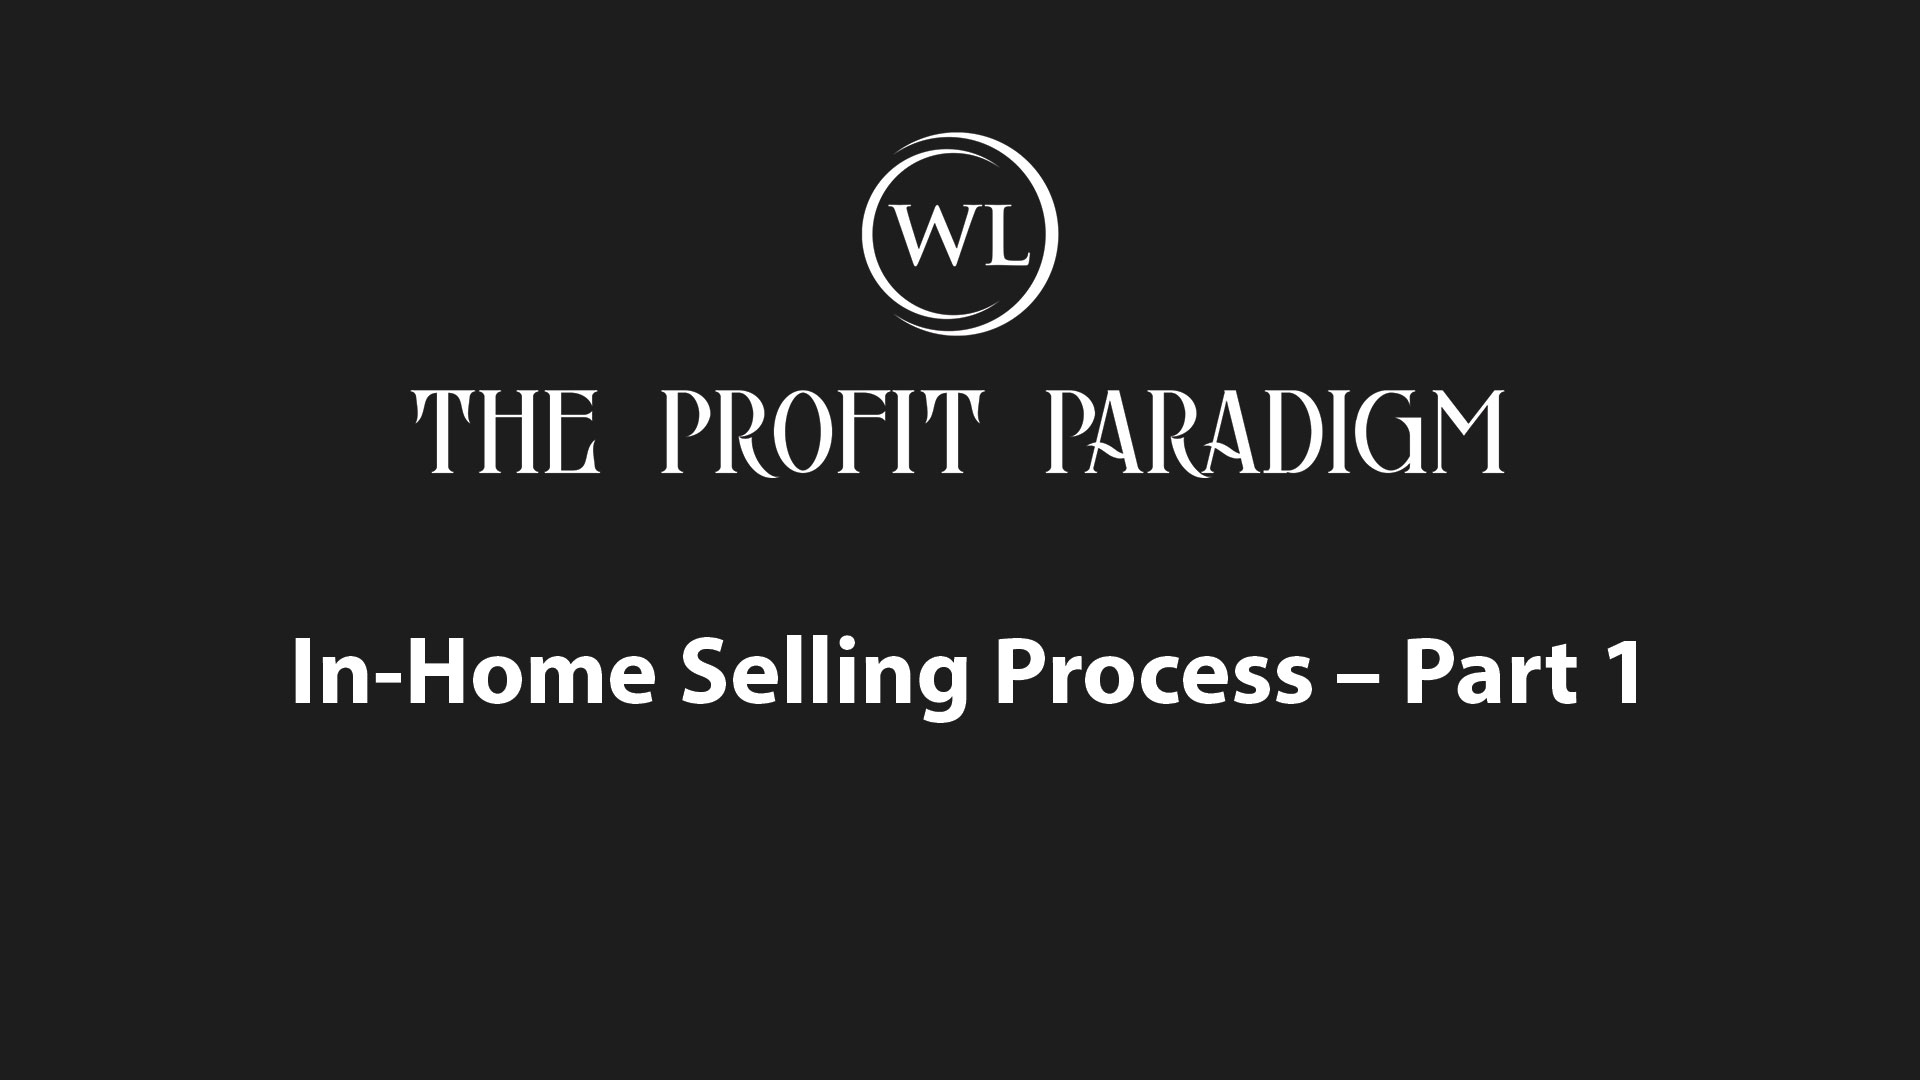 In-Home Selling Process – Part 1